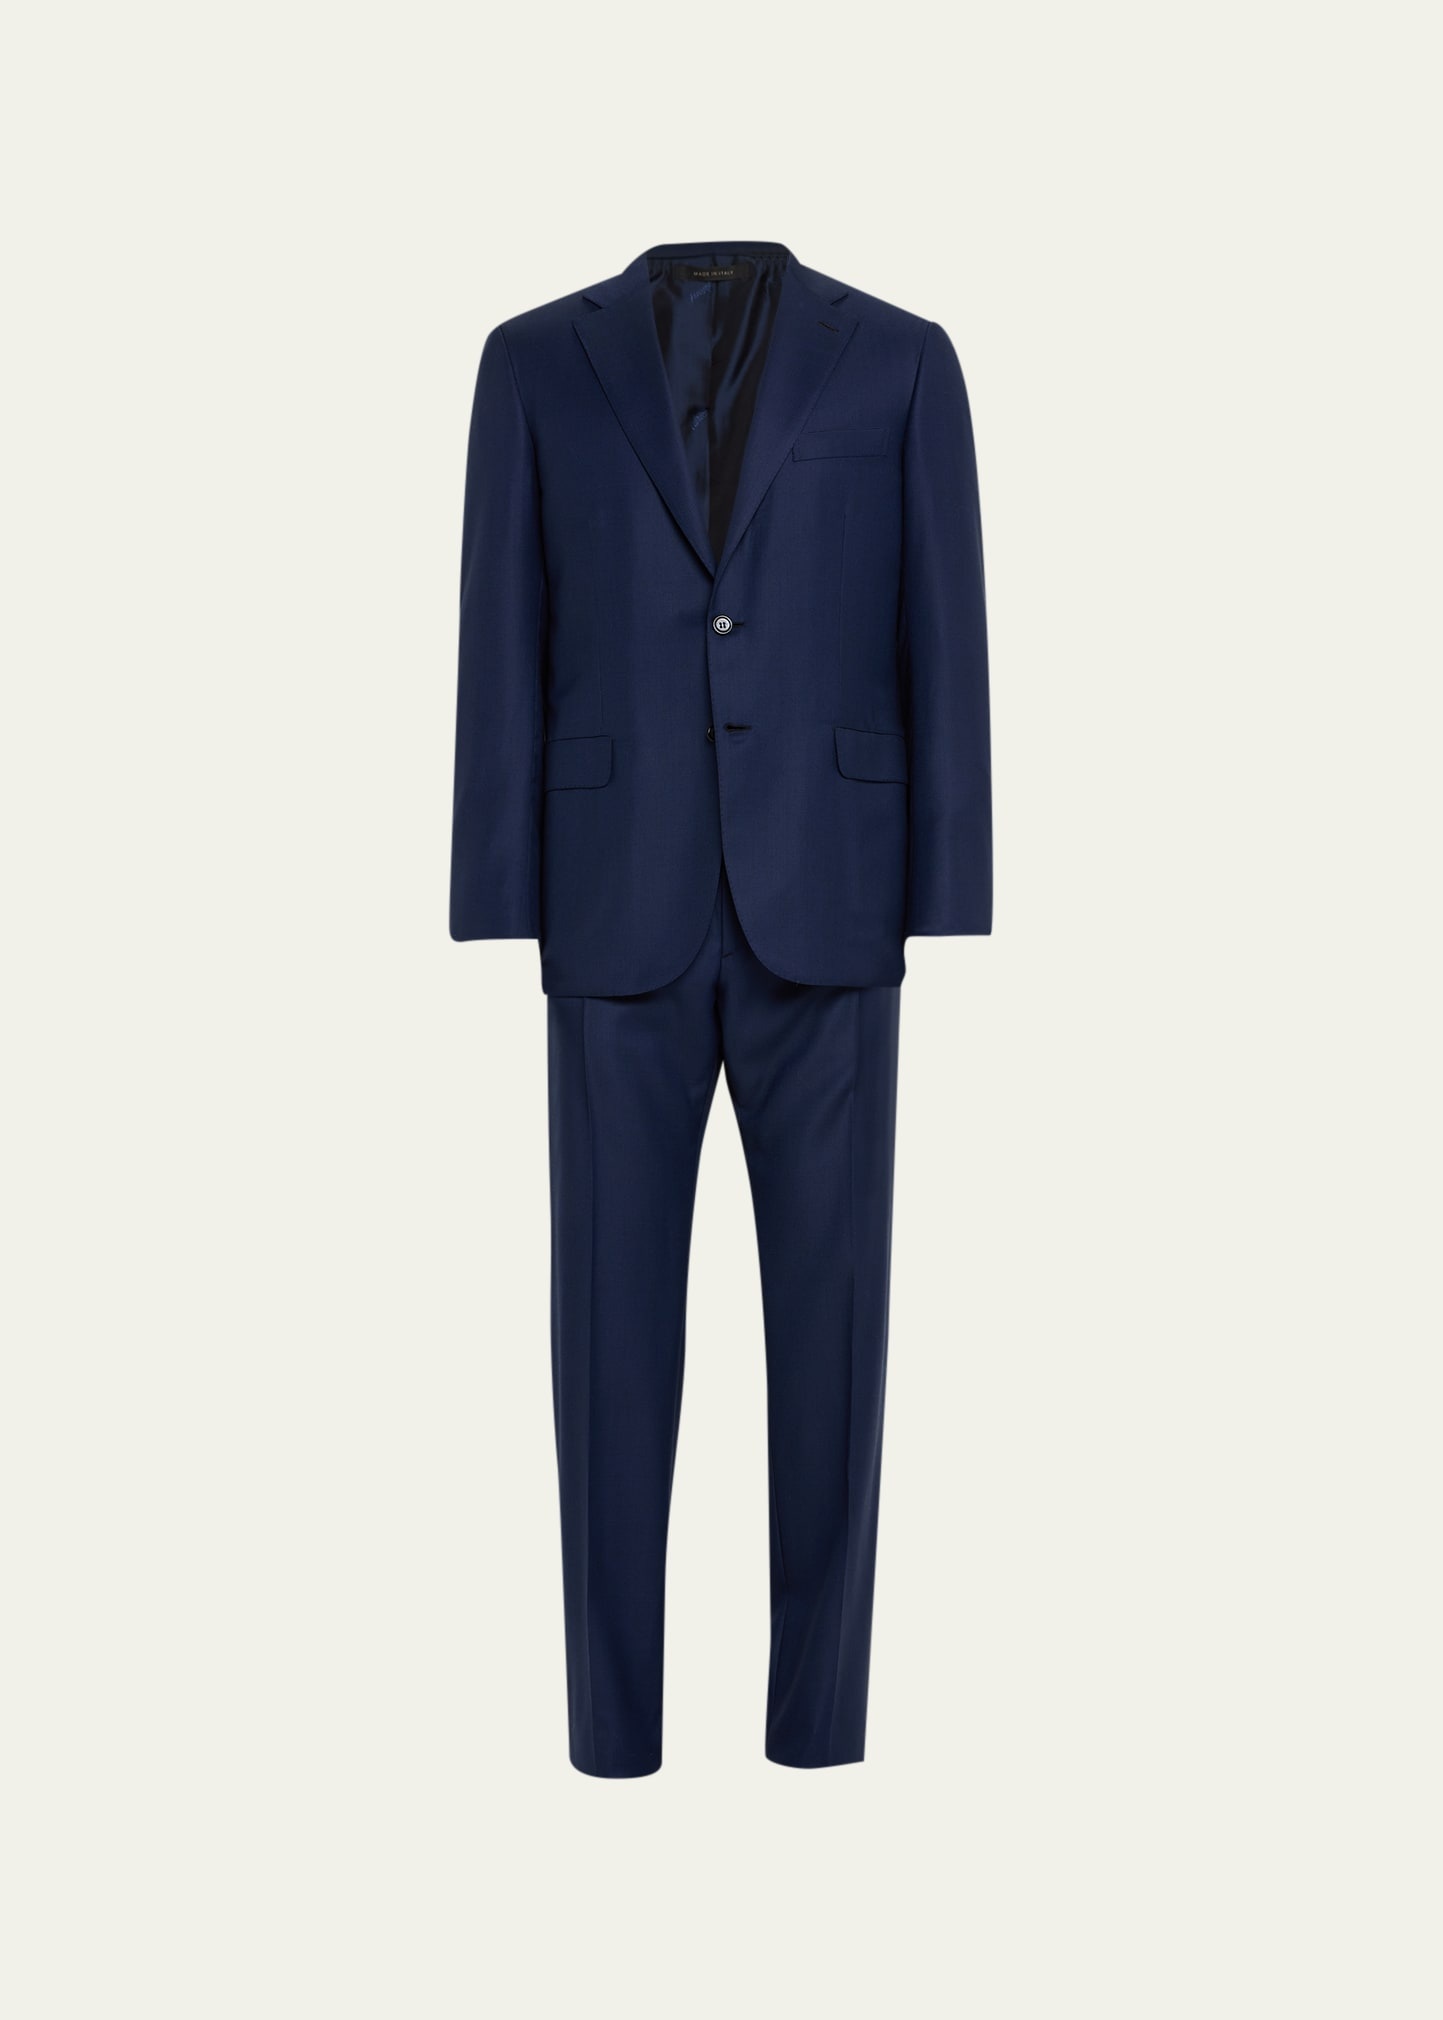 Men's Textured Solid Two-Piece Suit, Bright Navy - 1